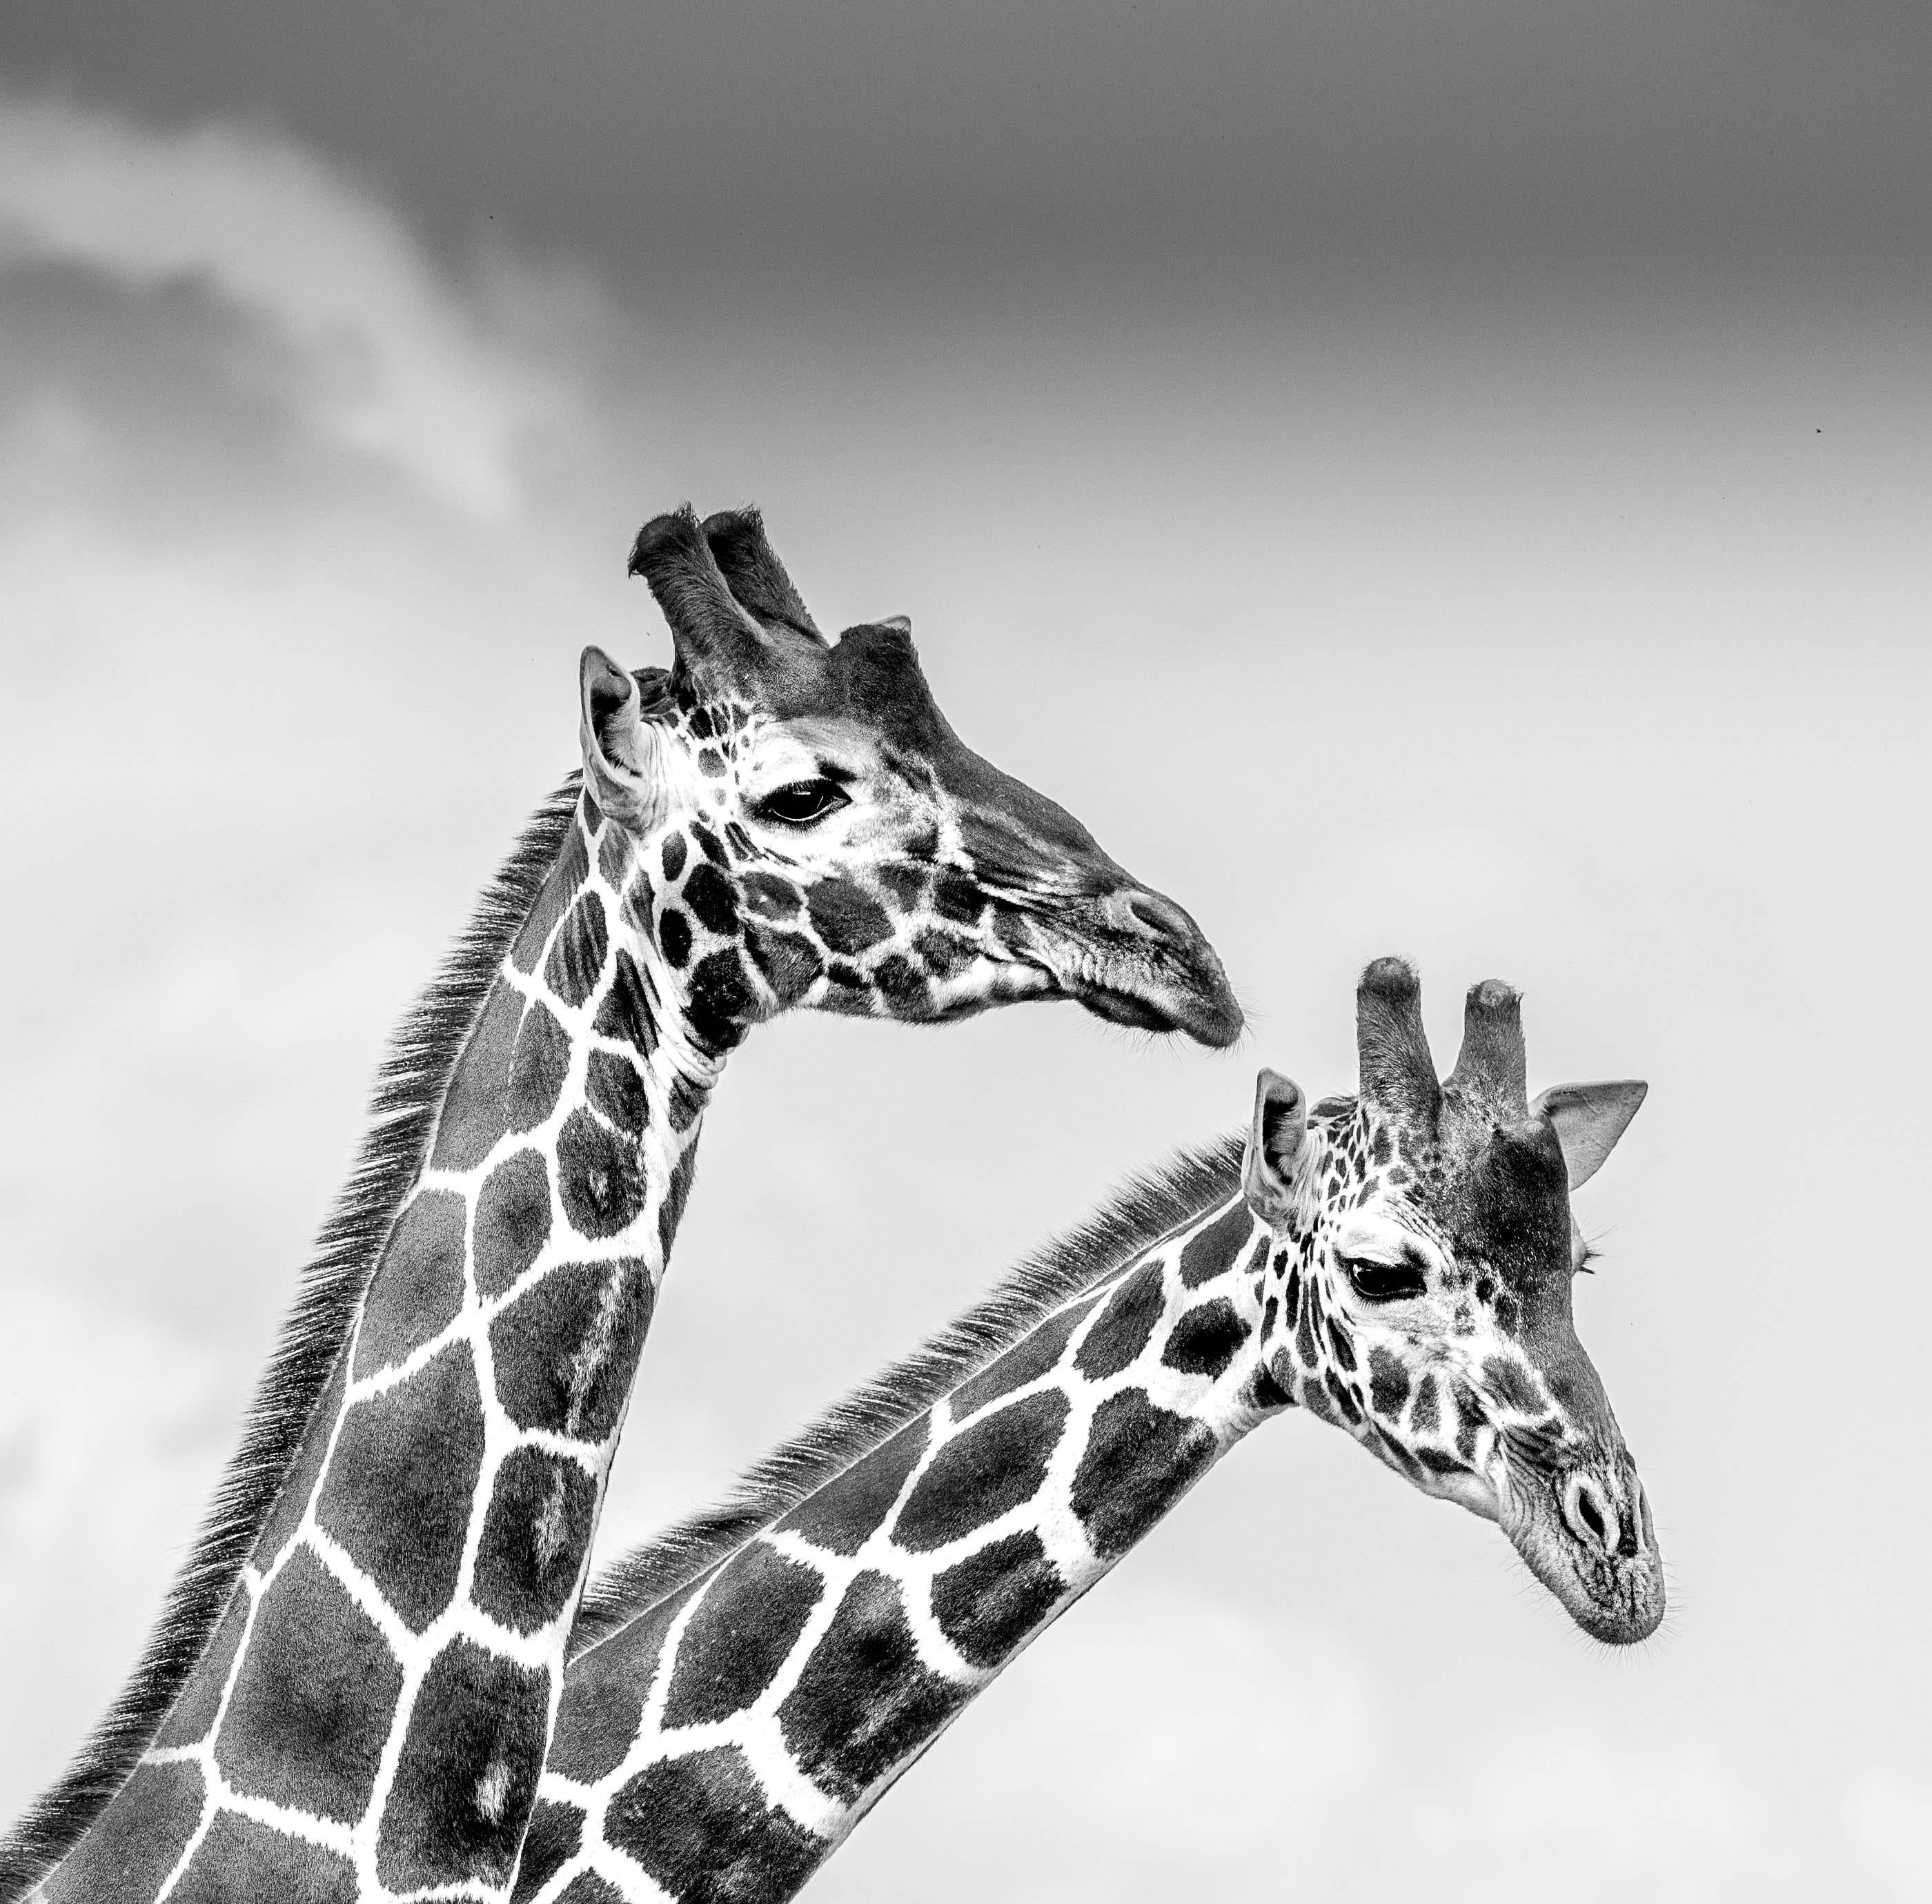 James Lewin - Two by Two, Lewa, Kenya, Photography 2019, Printed After